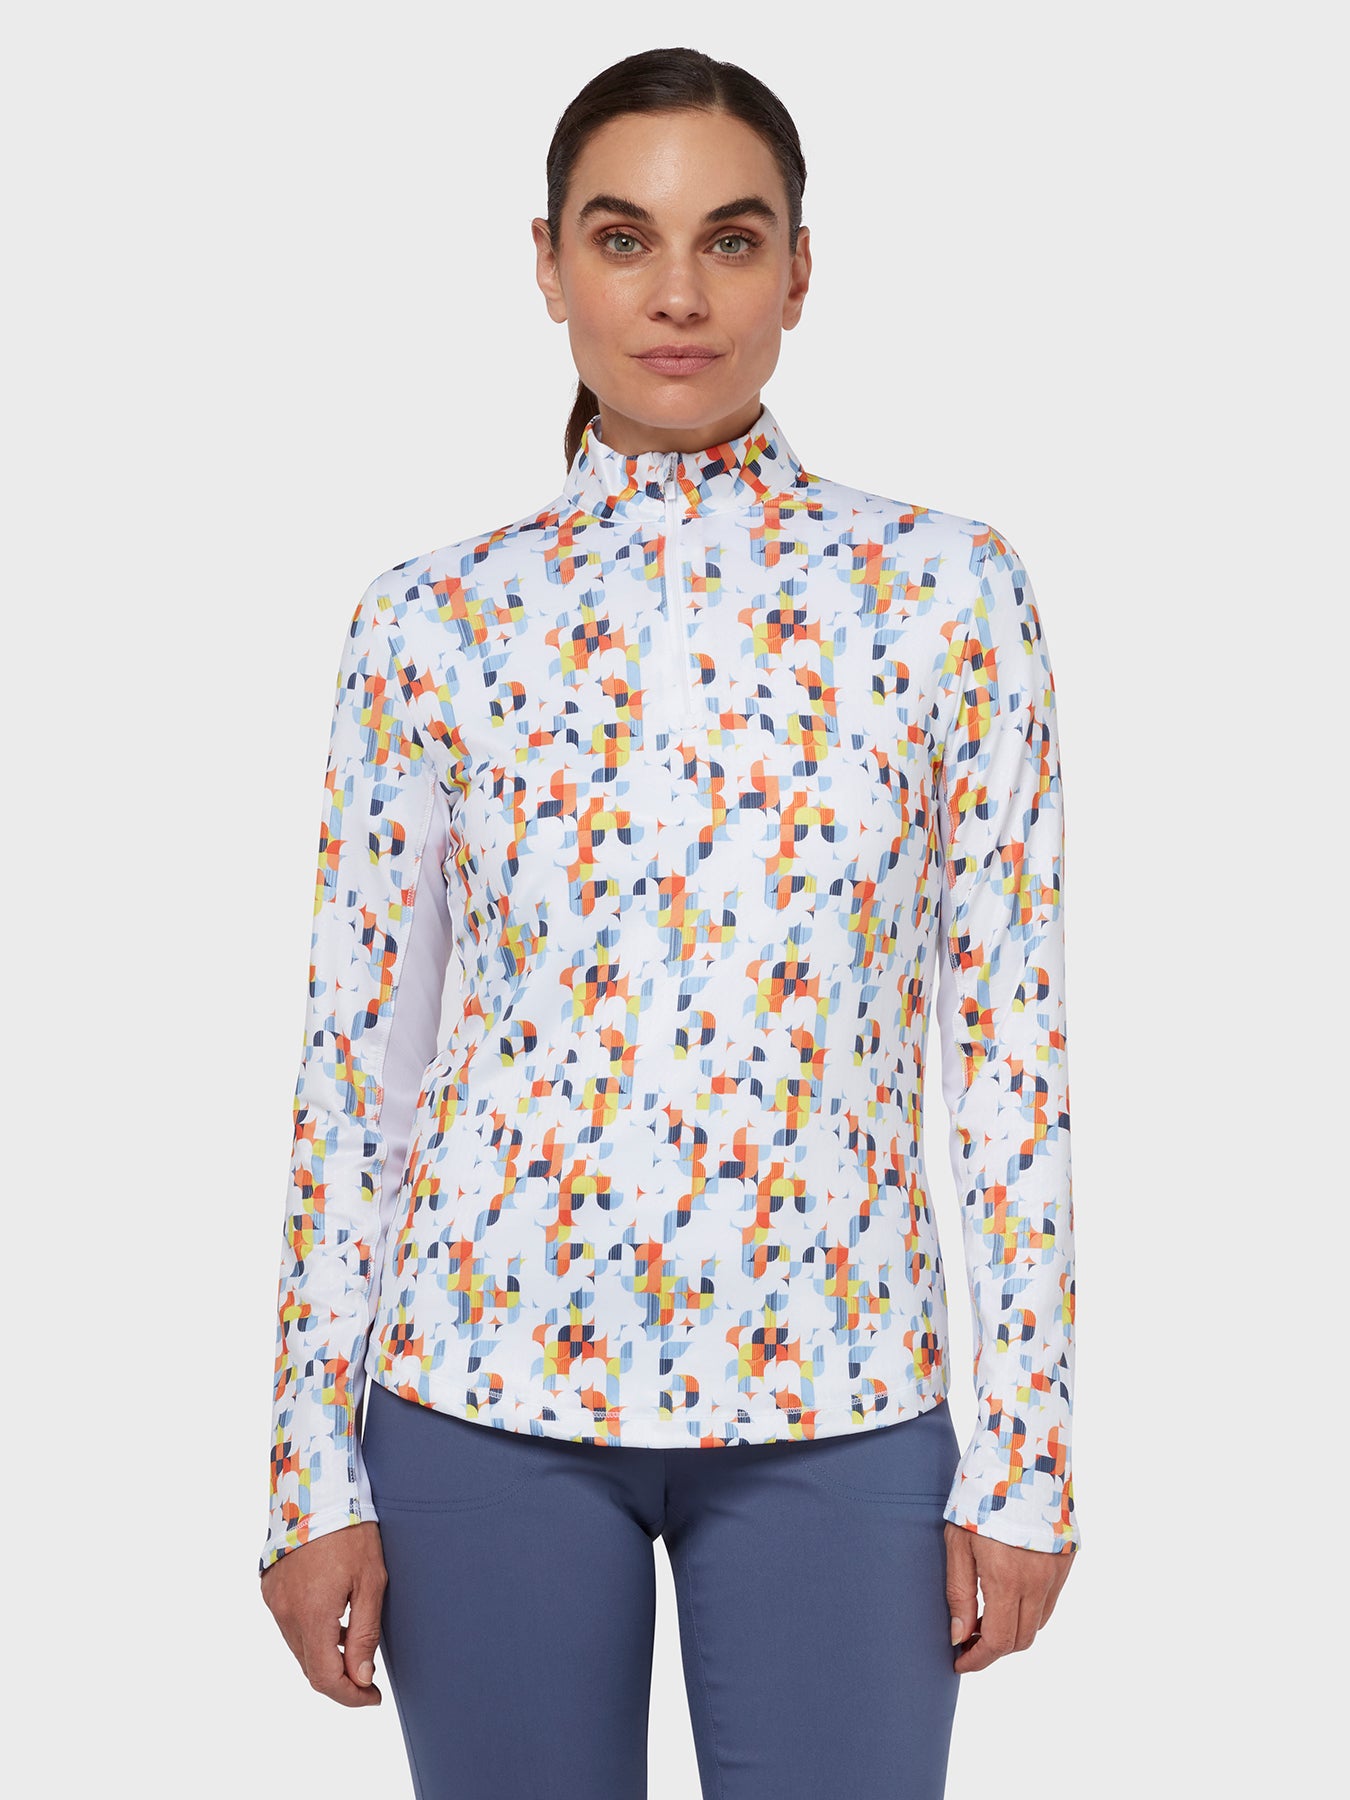 View Geo Printed Womens Top In Brilliant White information